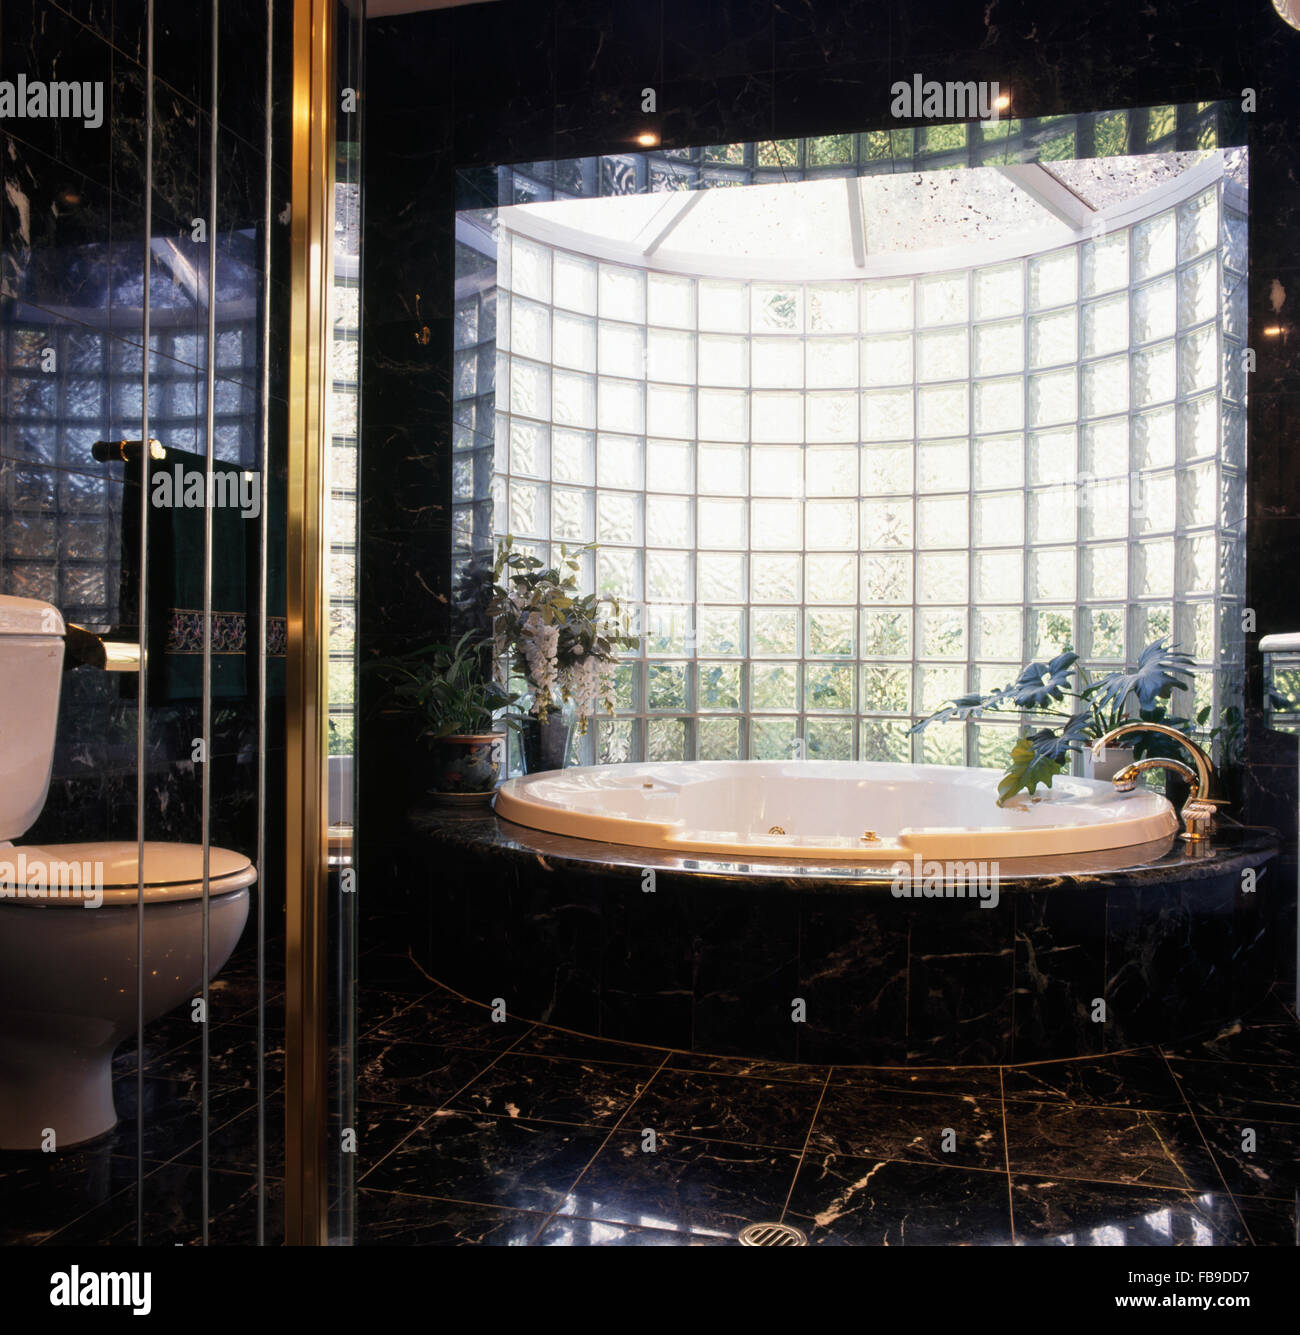 Spa bath and curved glass brick wall in nineties bathroom Stock Photo